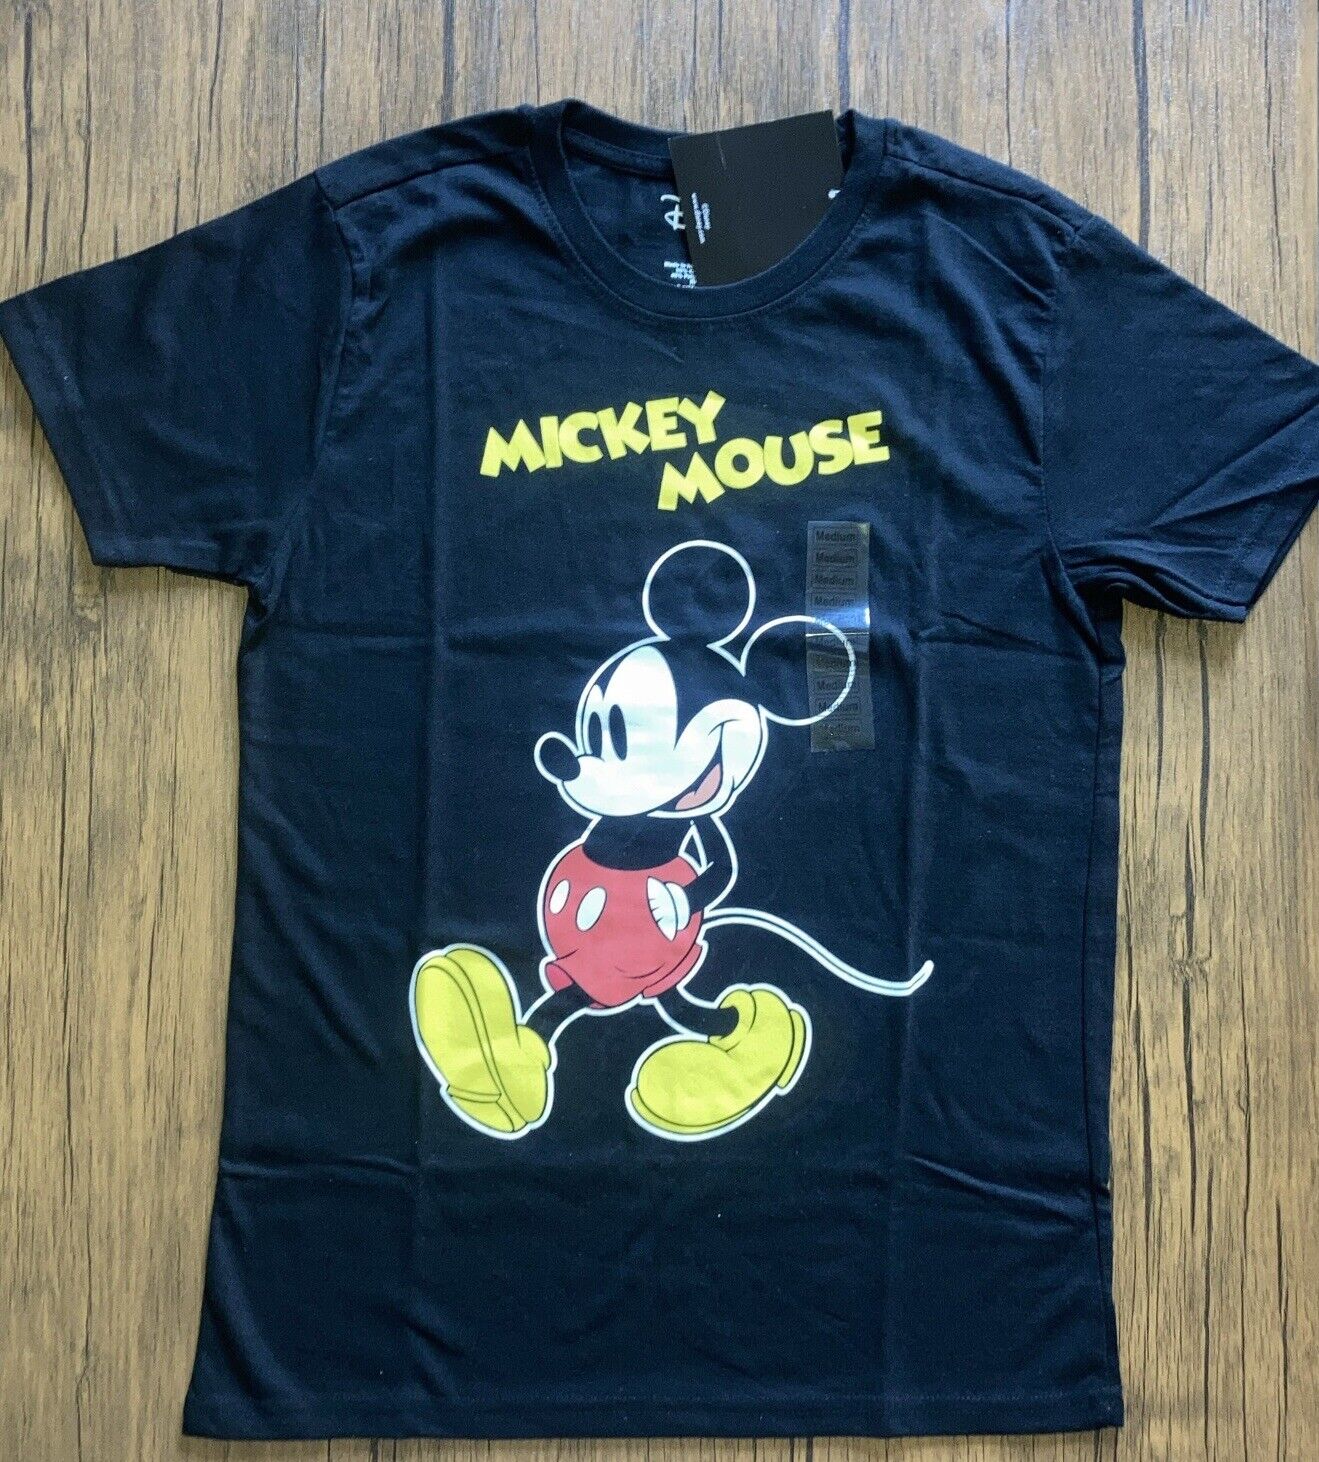 NWT Officially Licensed DISNEY Mickey Mouse Shirt Black Size Large